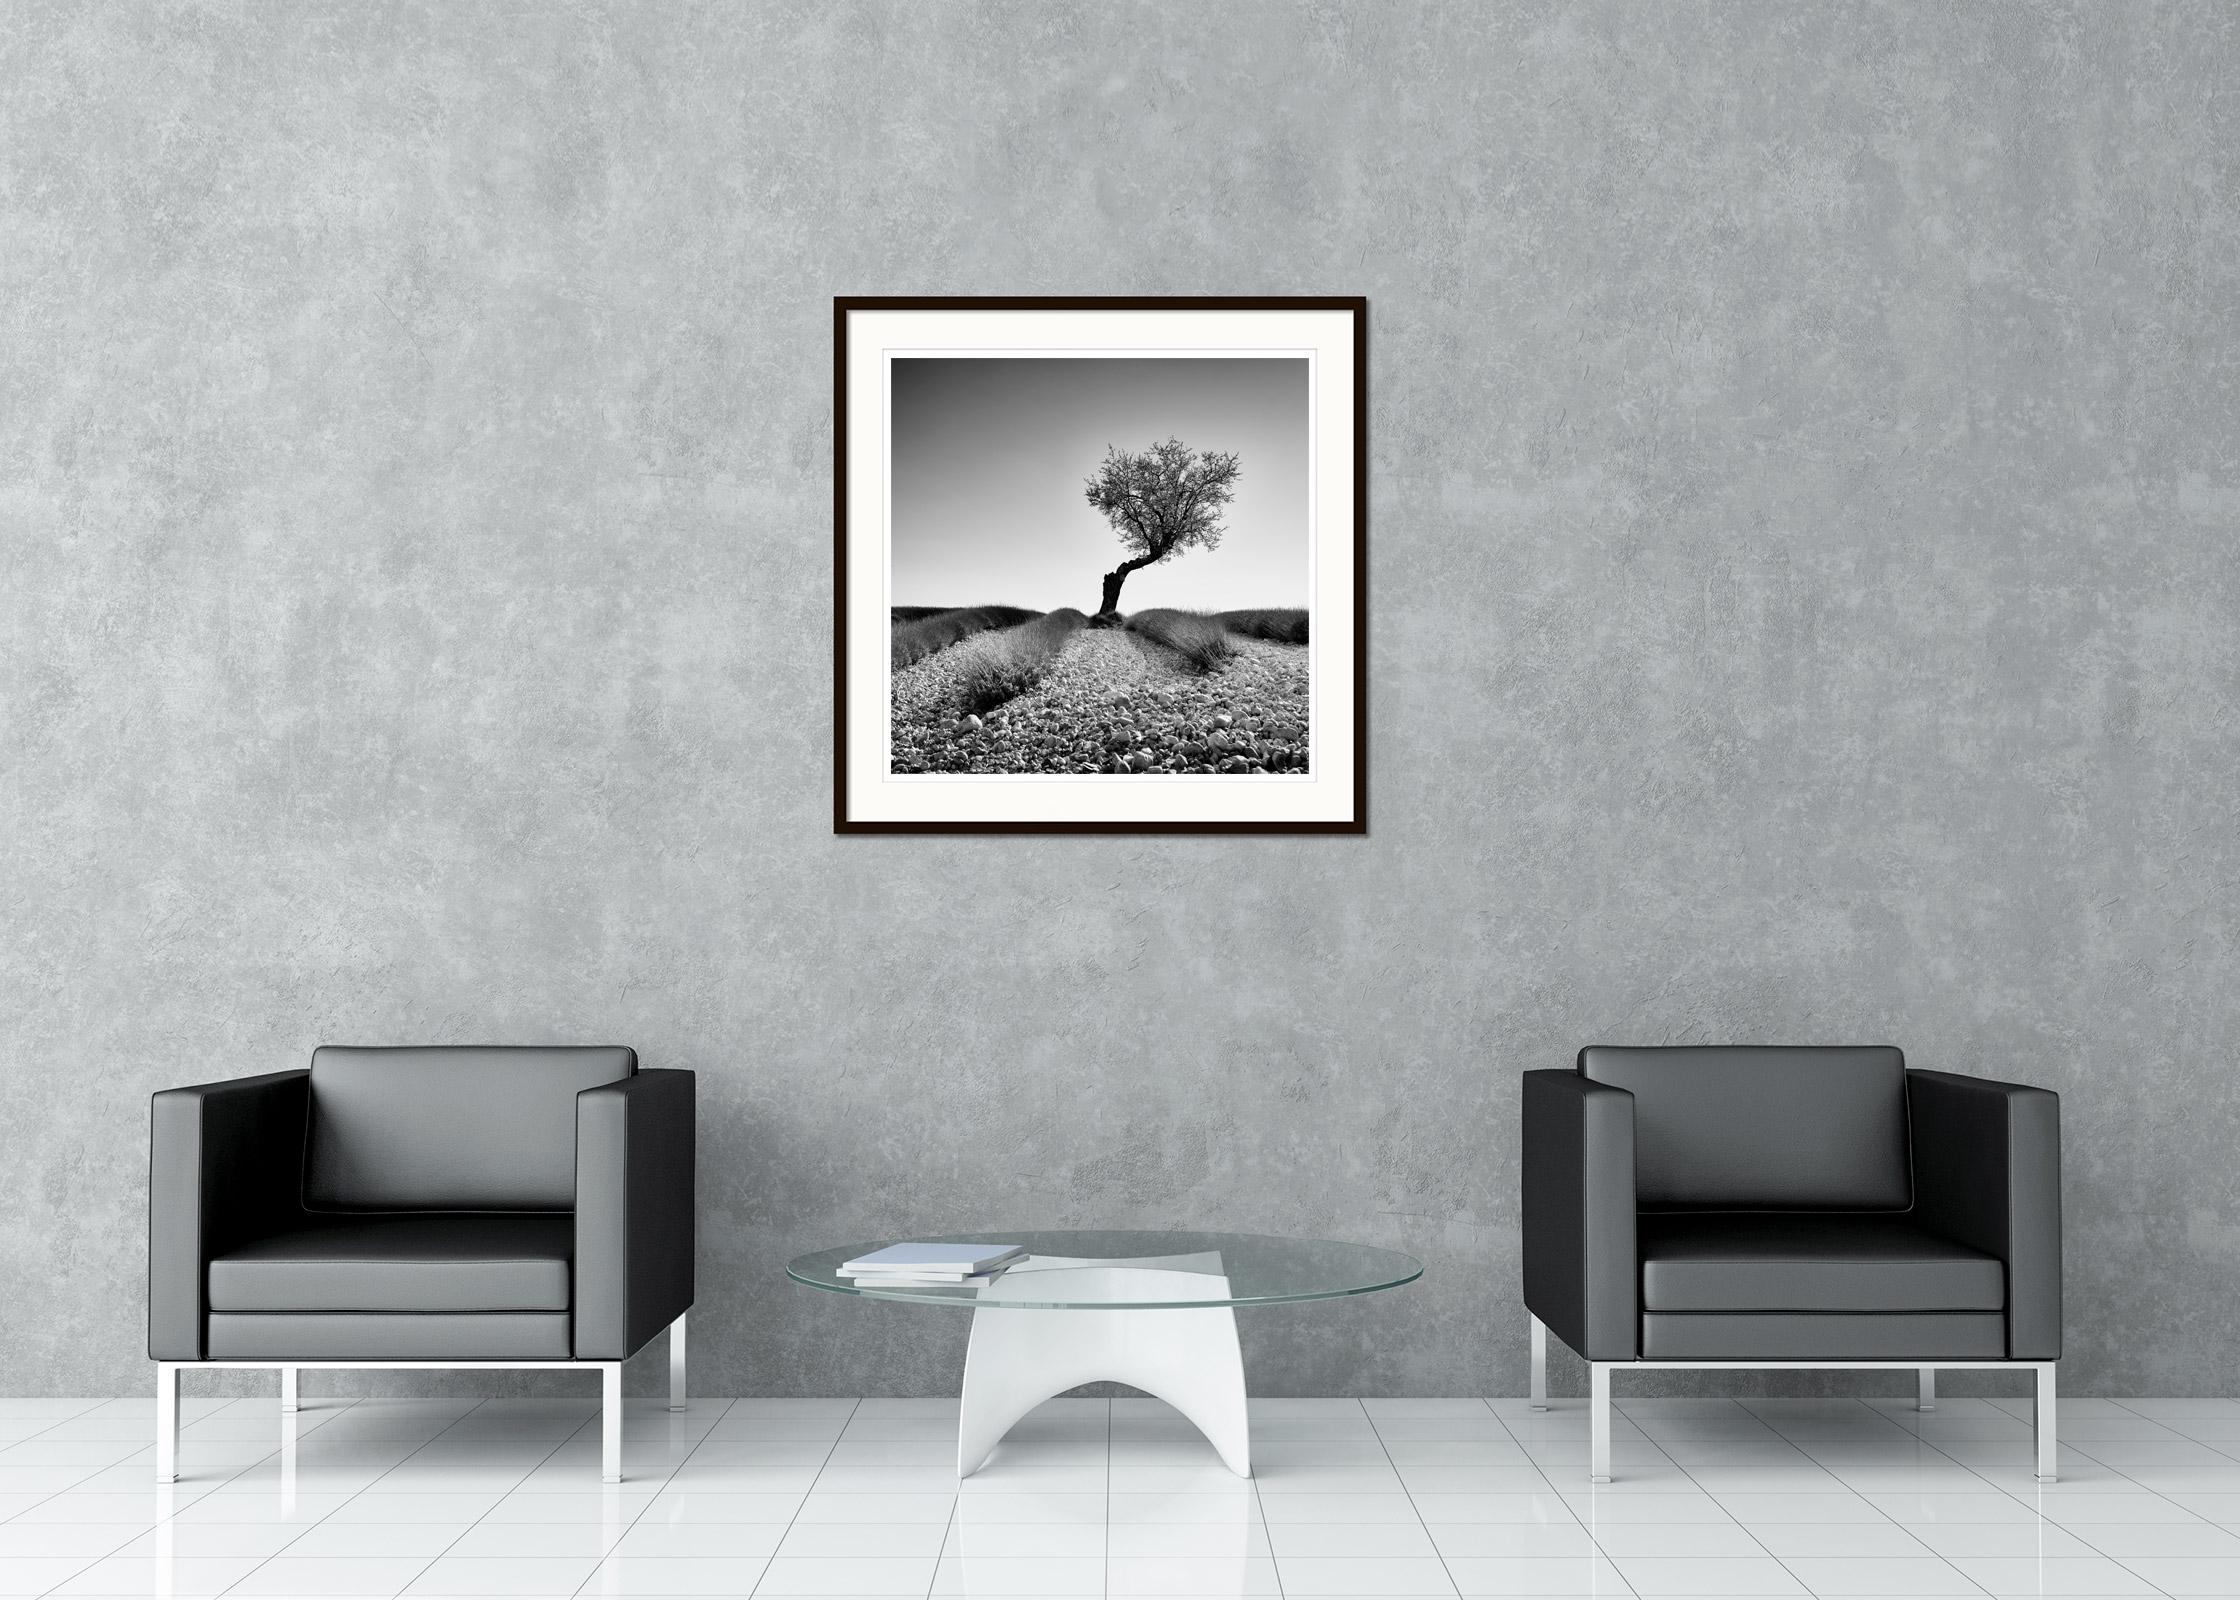  Black and white fine art landscape photography. Archival pigment ink print as part of a limited edition of 9. All Gerald Berghammer prints are made to order in limited editions on Hahnemuehle Photo Rag Baryta. Each print is stamped on the back and